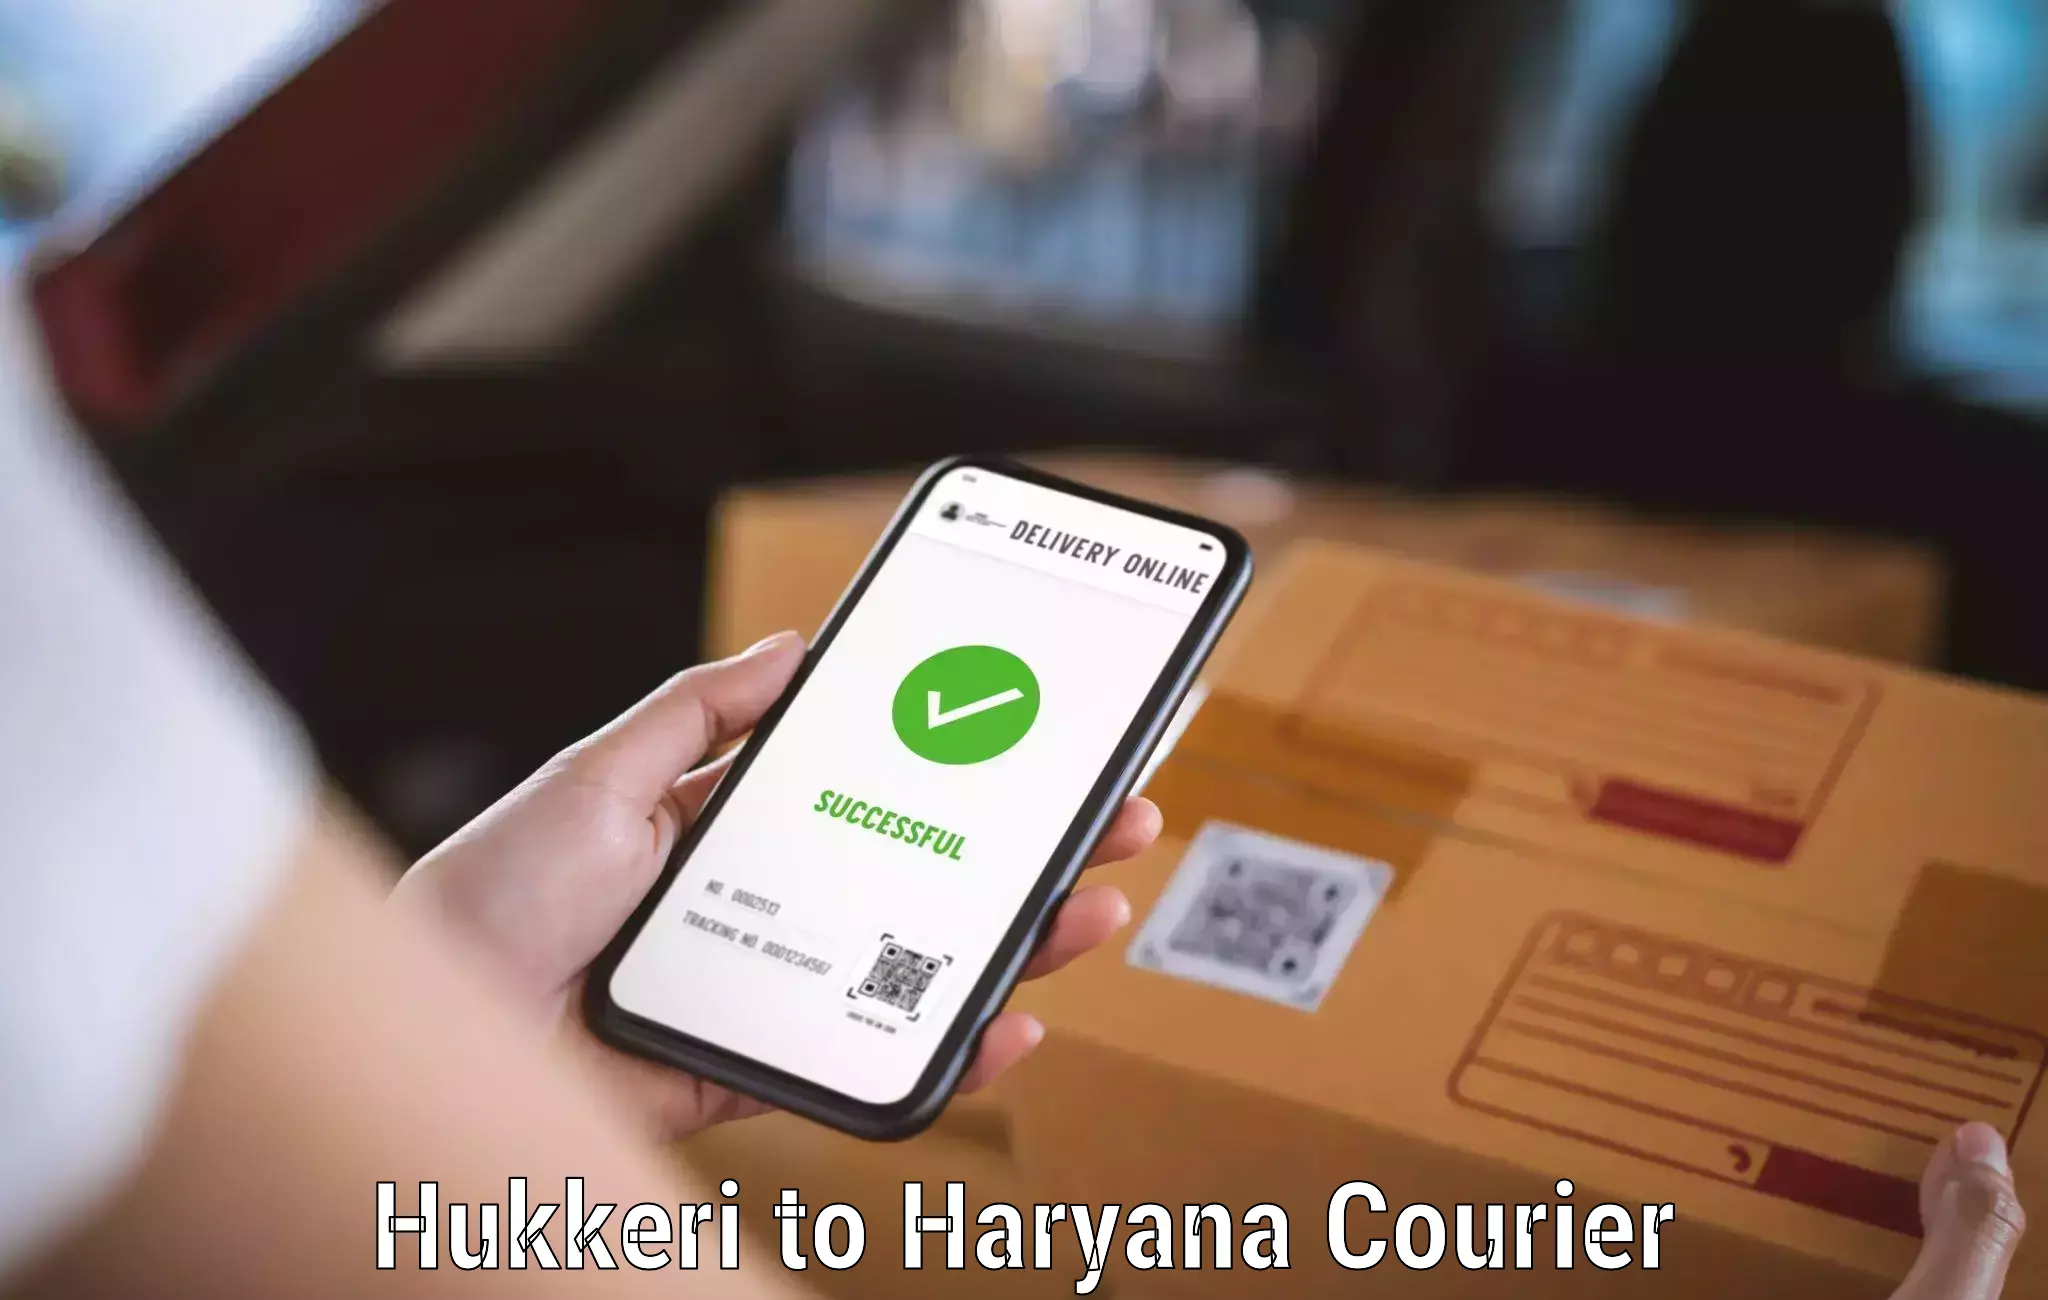 Courier service booking Hukkeri to Ellenabad